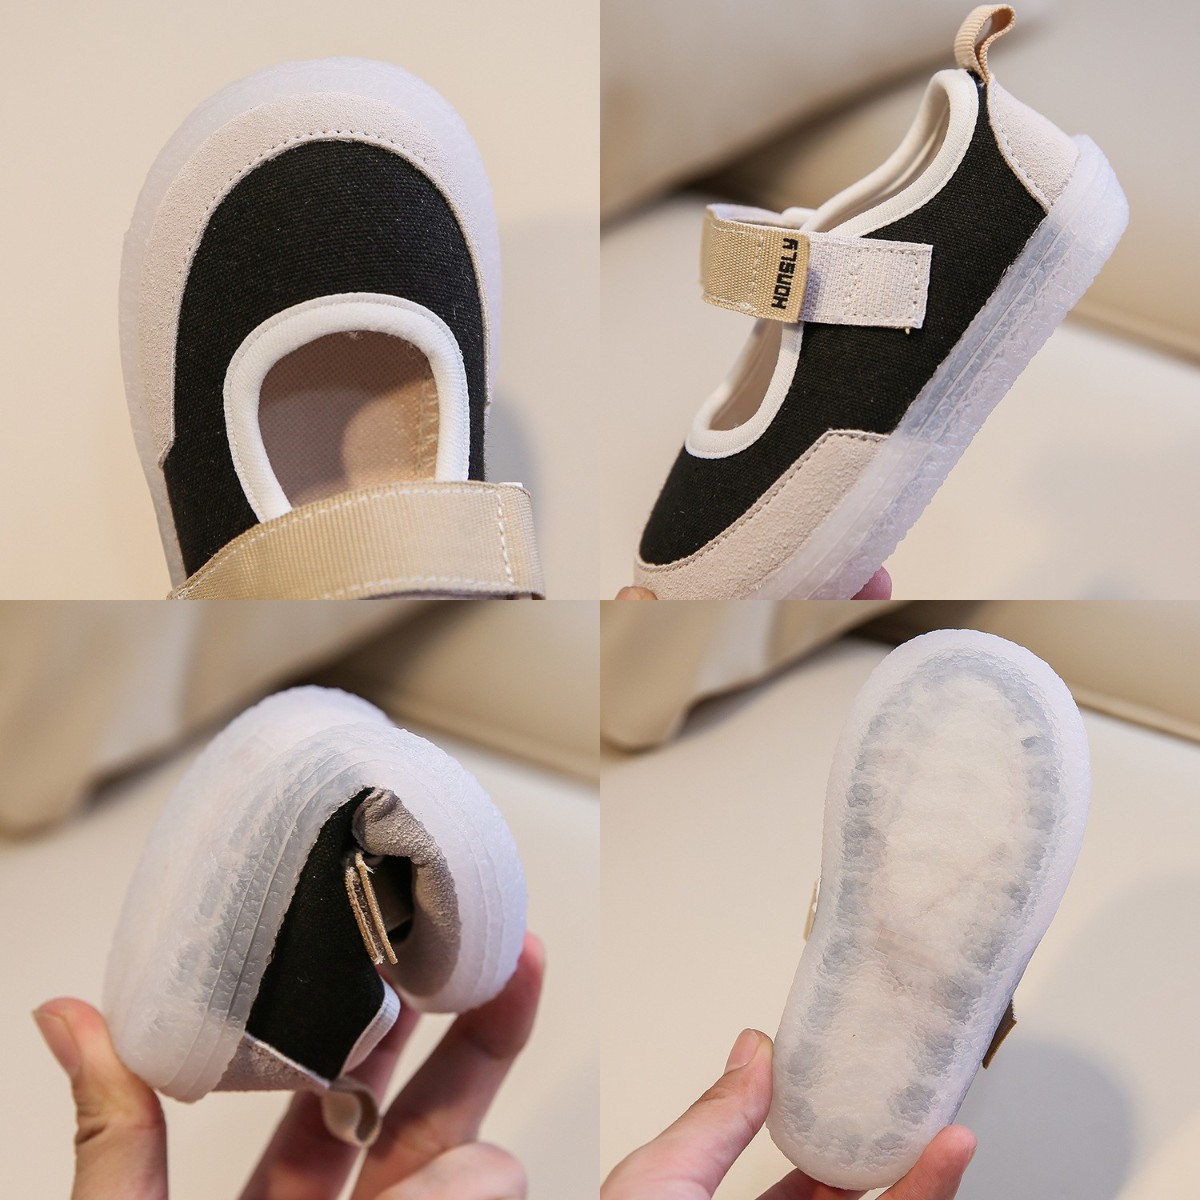 boys and girls canvas shoes 2020 autumn new Korean version of Xiuxie single shoes with sole Korean version of antique shoes flat white shoes doll shoes